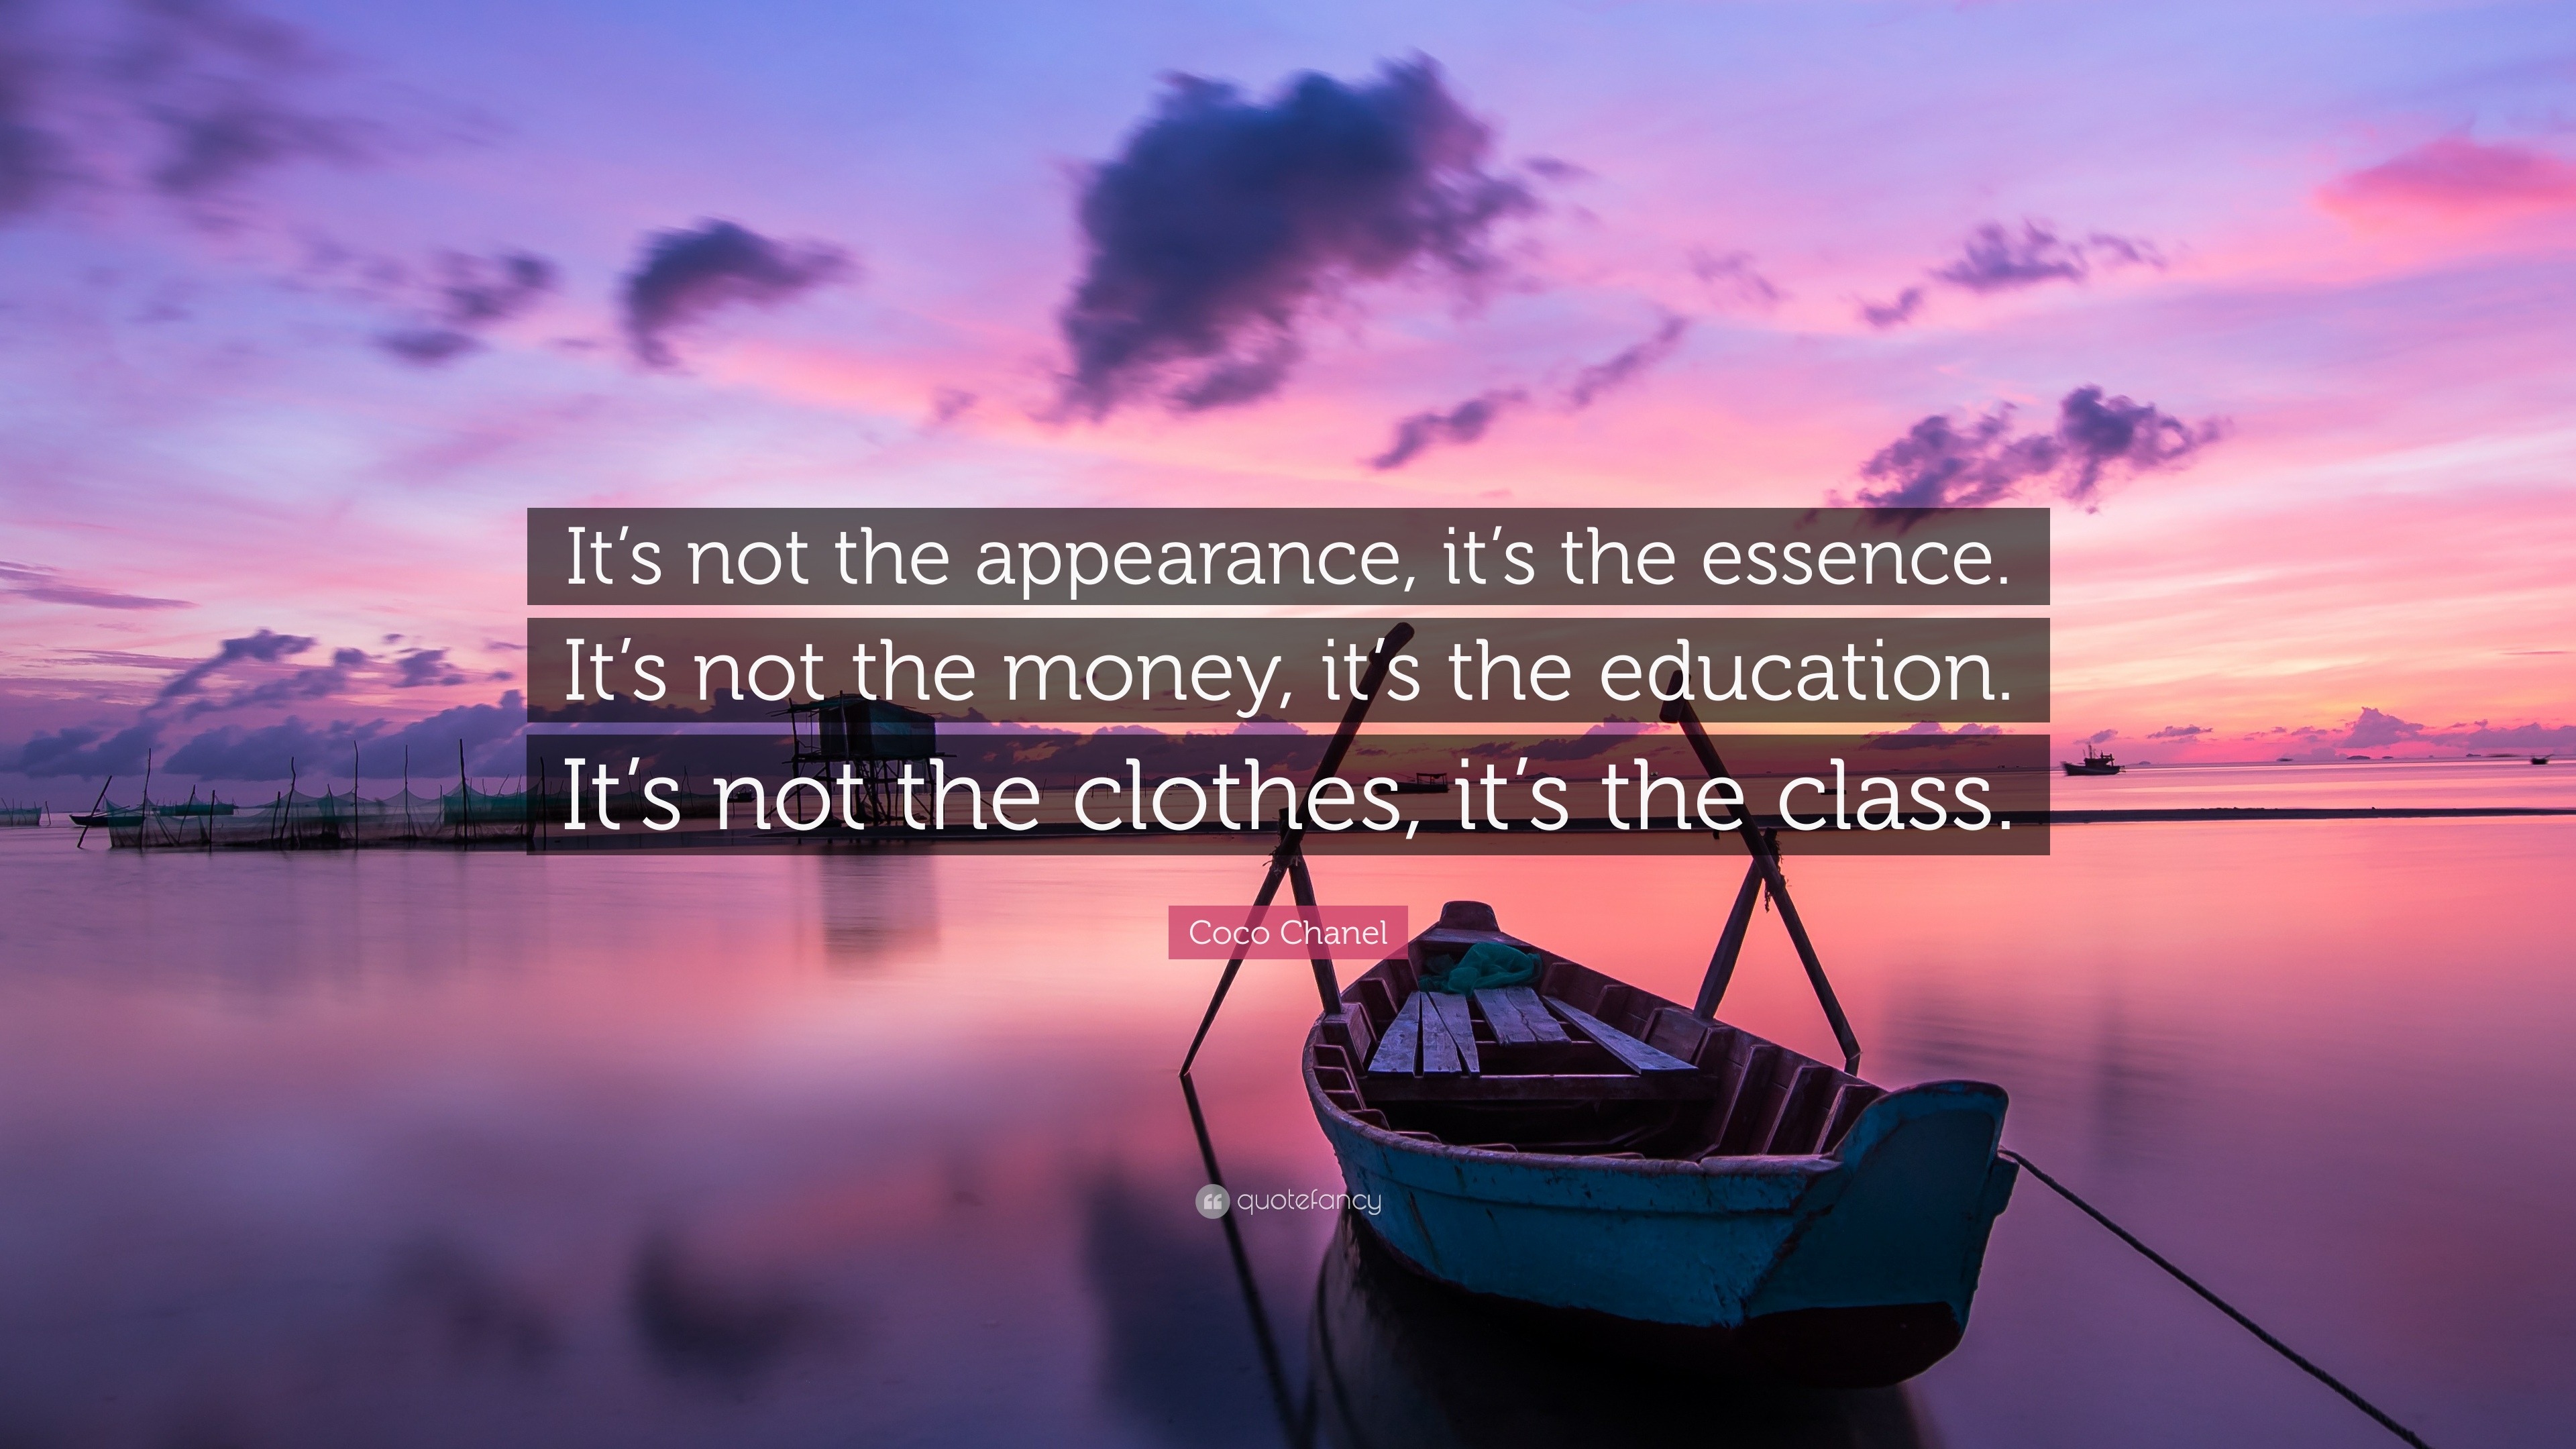 Coco Chanel Quote: “It's not the appearance, it's the essence